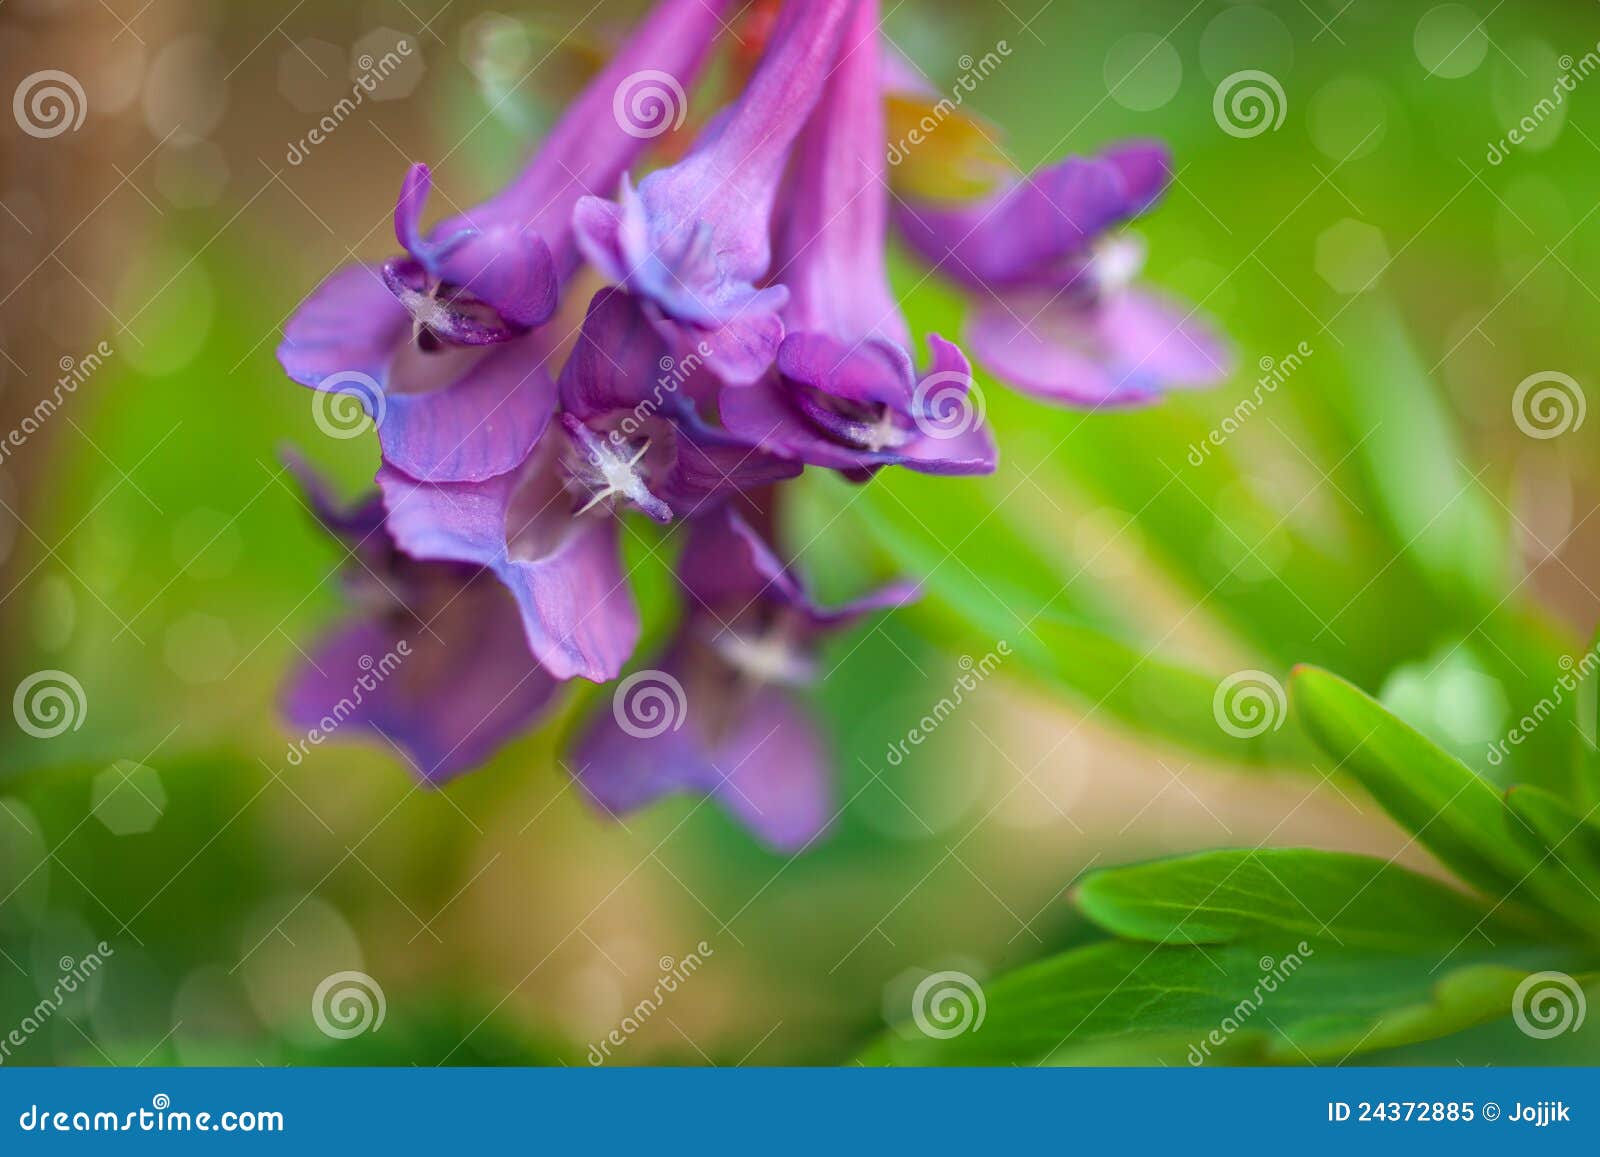 Background of Leaves and Flowers Stock Image - Image of blossom